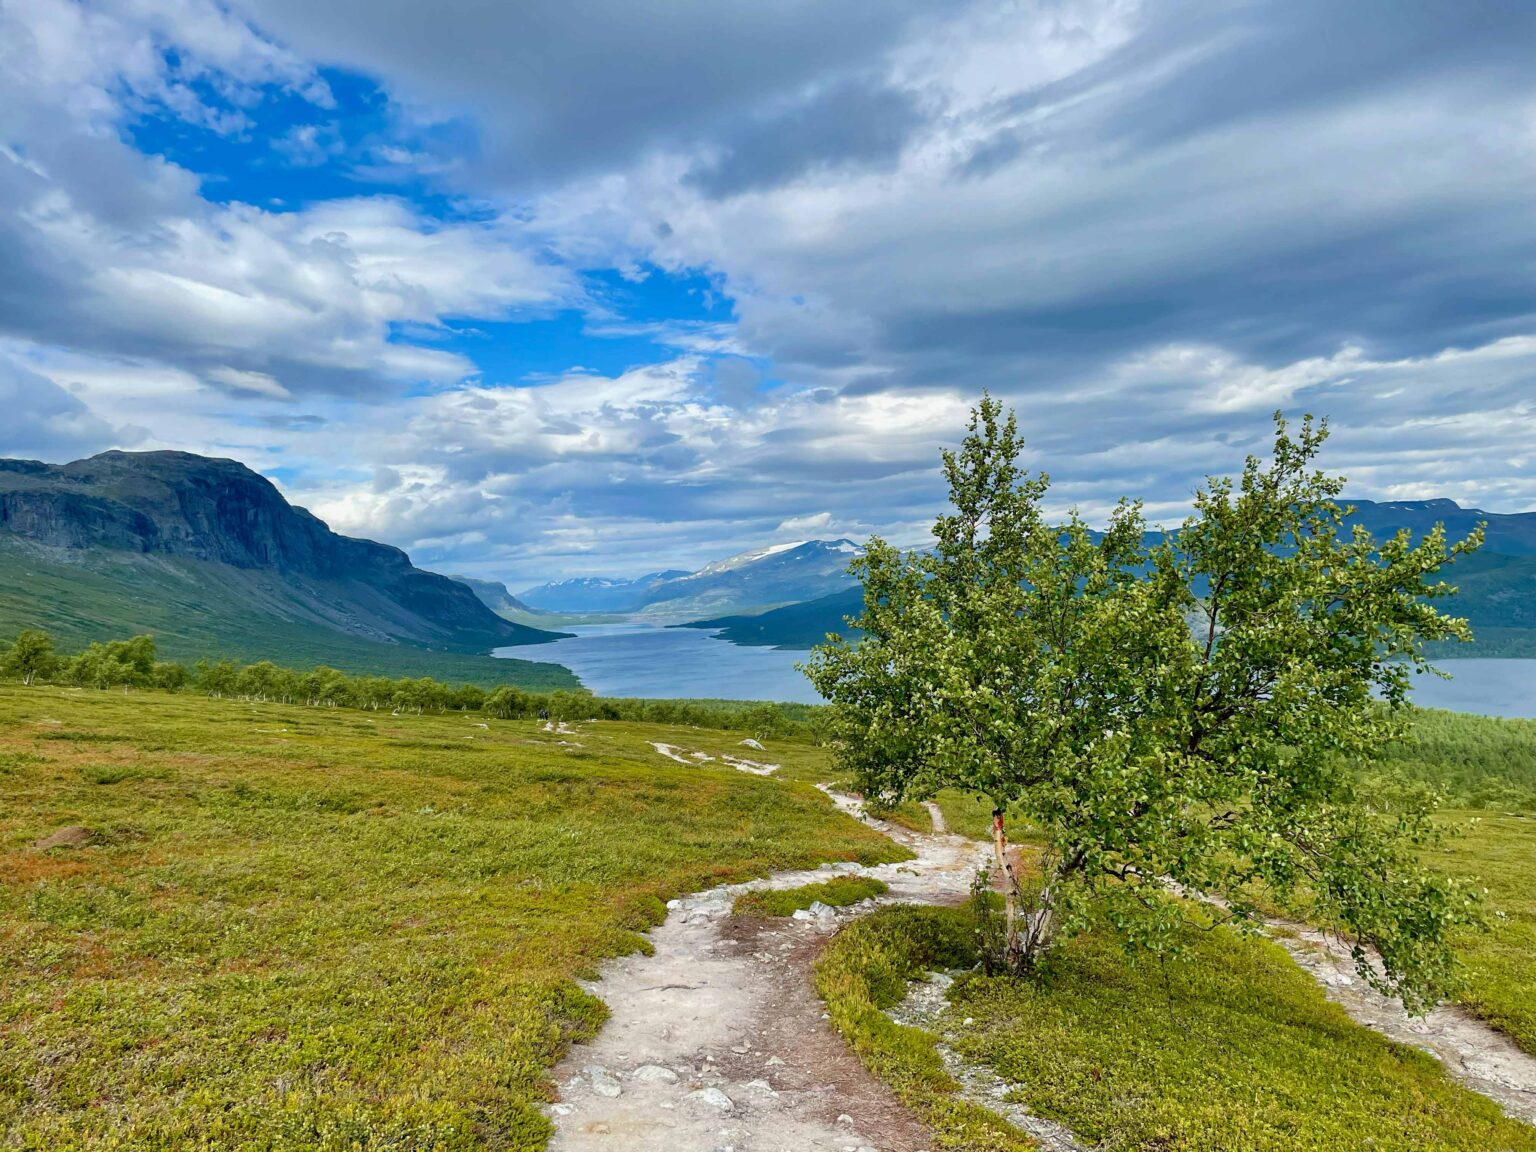 Lake Langas seen from the south of Saltoluokta along the Kungsleden (Photo by Anders Norén on Unsplash)